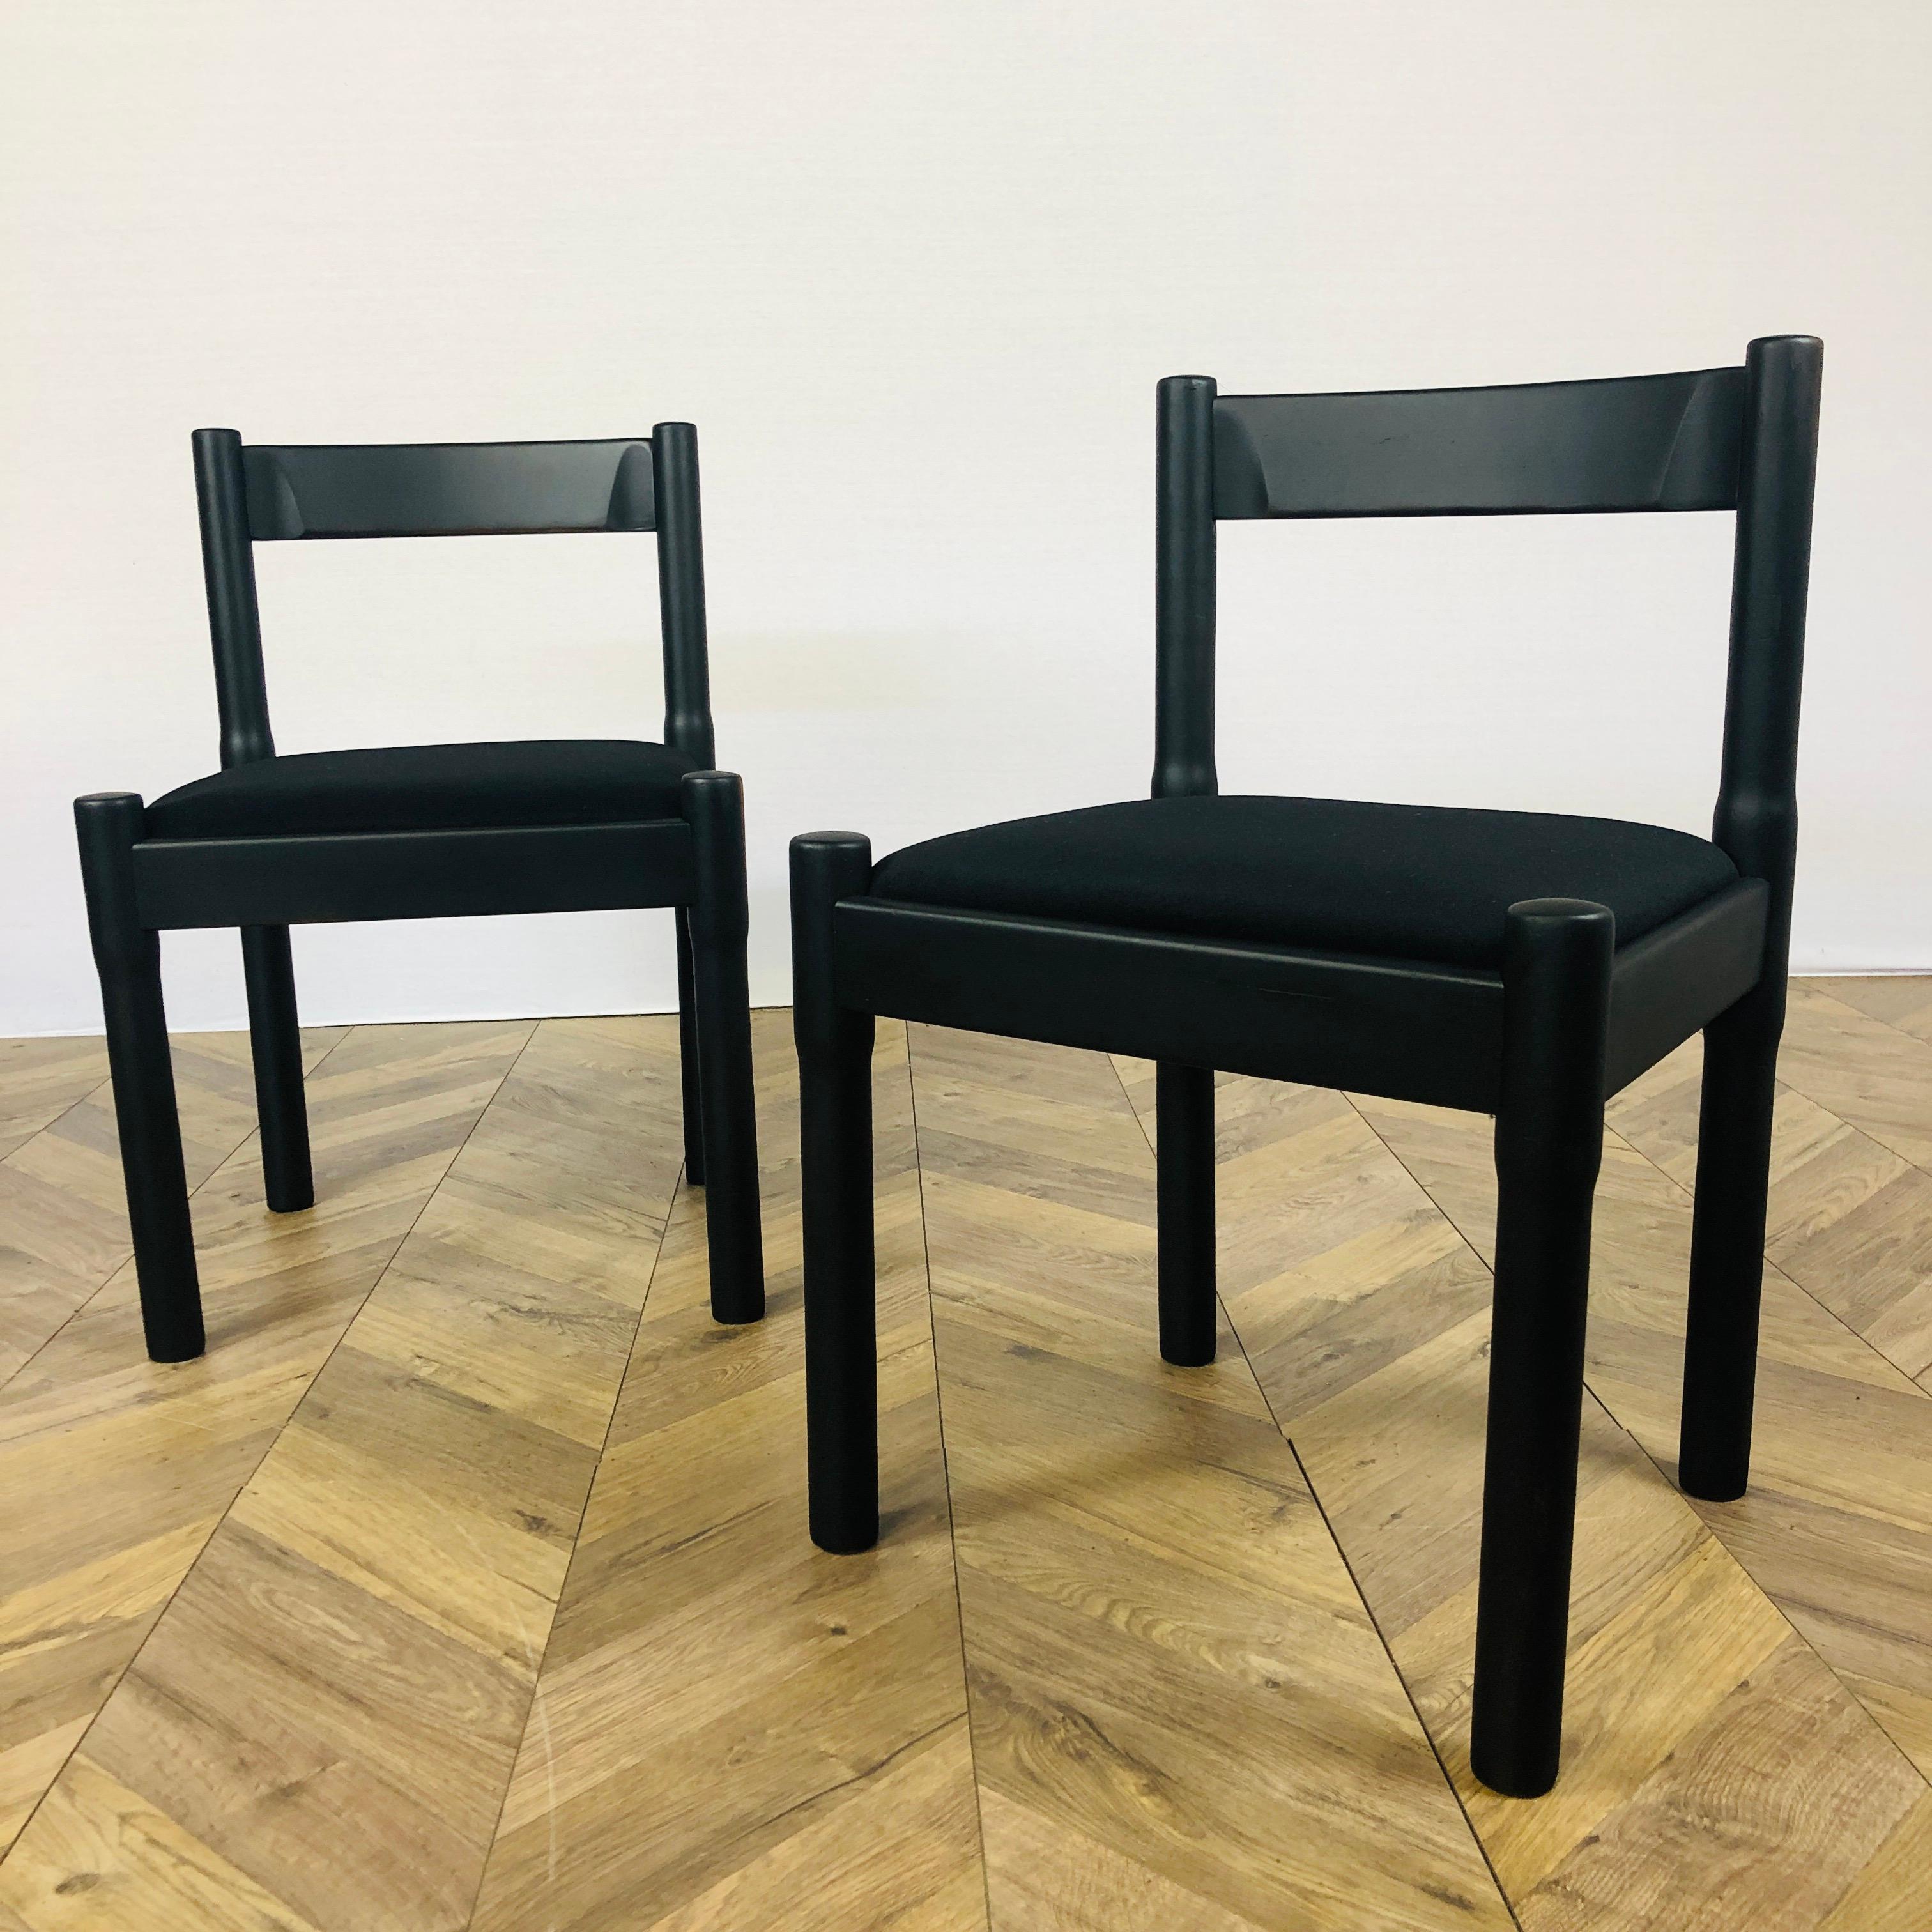 A Set of 2, super stylish Modernist chairs, Manufactured by Cassina in Italy. 

The iconic Carimate chair was designed by influential designer & architect Vico Magistretti in 1959 for the Club House of the Carimate Golf Club in Lombardy. 

It